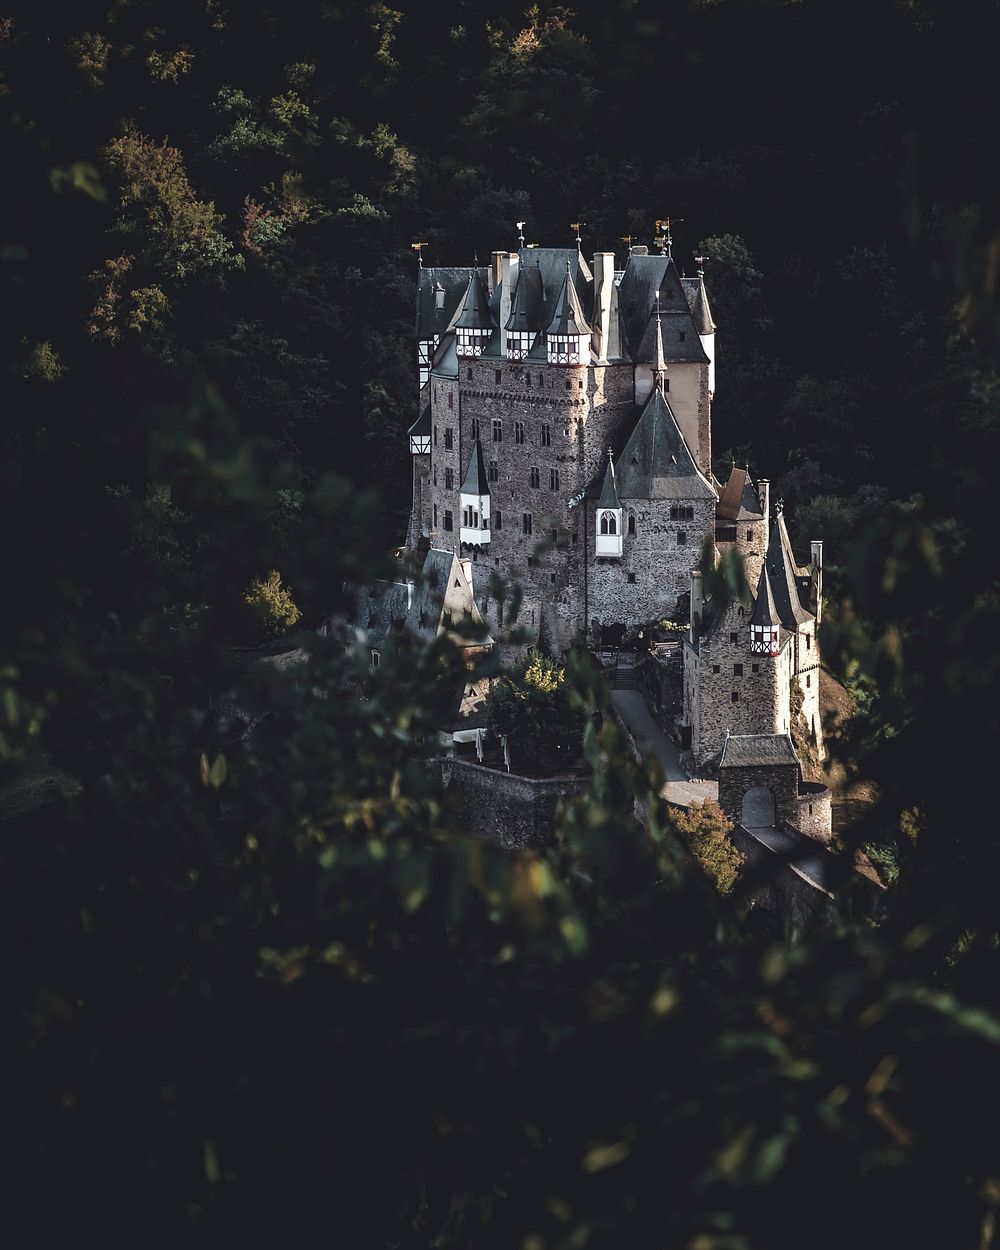 Castle Eltz on a hill in Germany